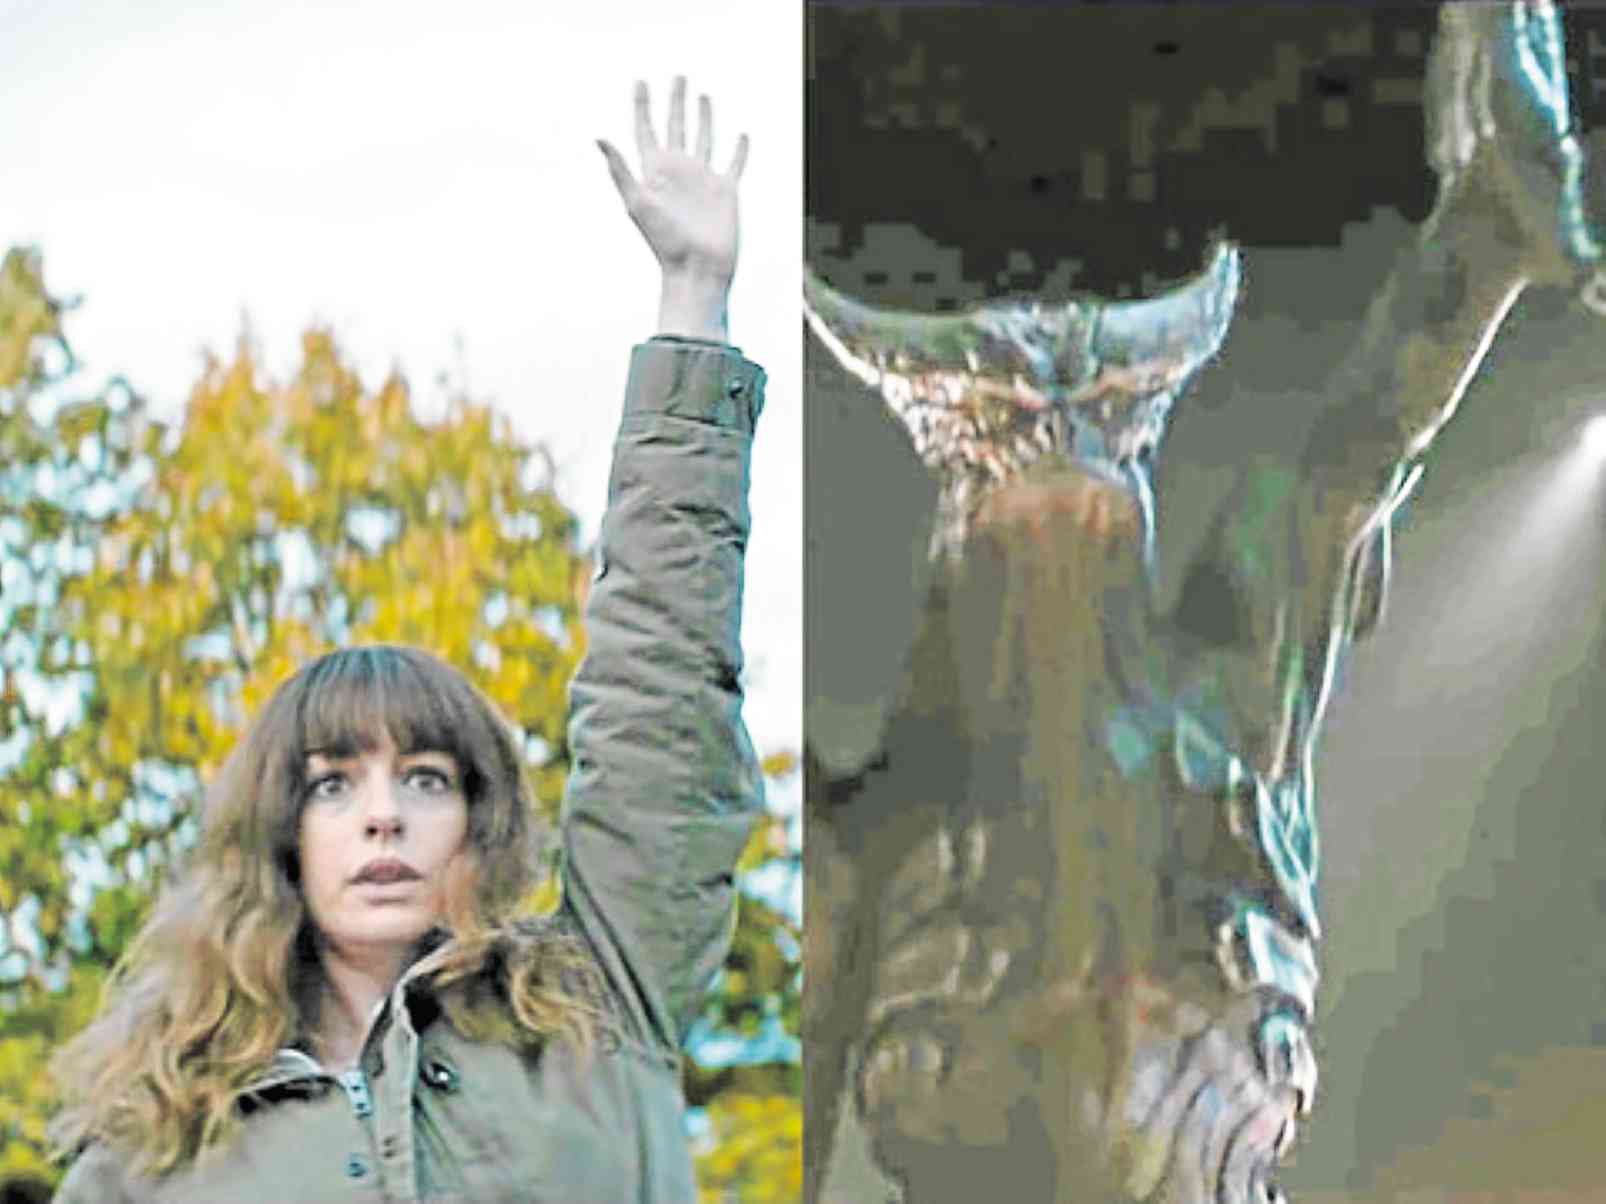  Anne Hathaway’s character finds ways to “direct” and control a monster in “Colossal.”